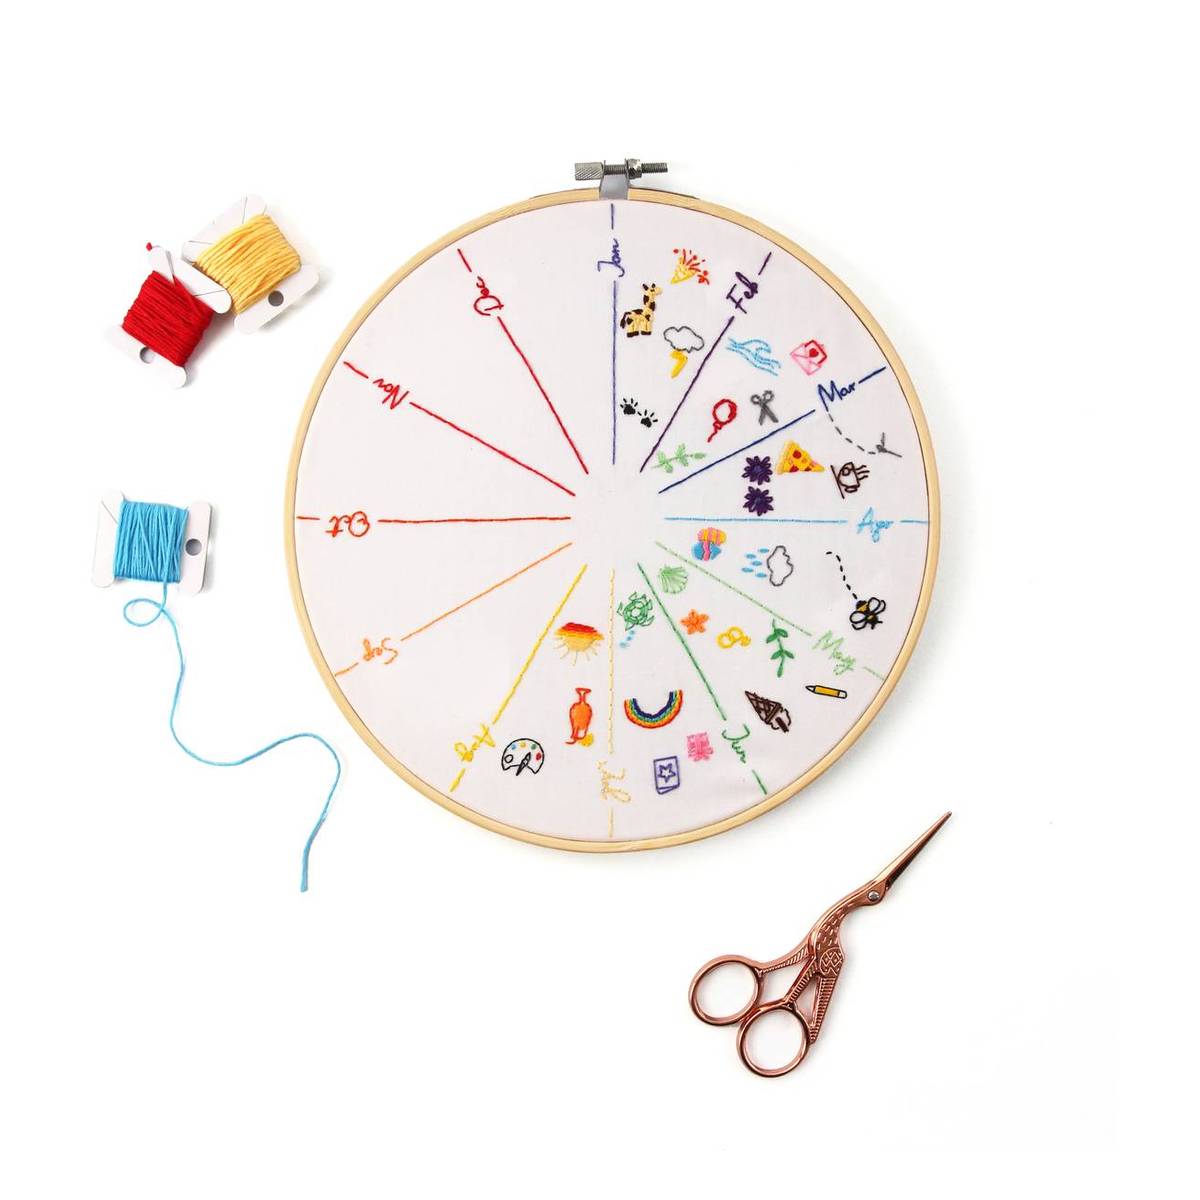 Buy Artisan Year of Stitches Embroidery Kit for GBP 8.00 | Hobbycraft UK